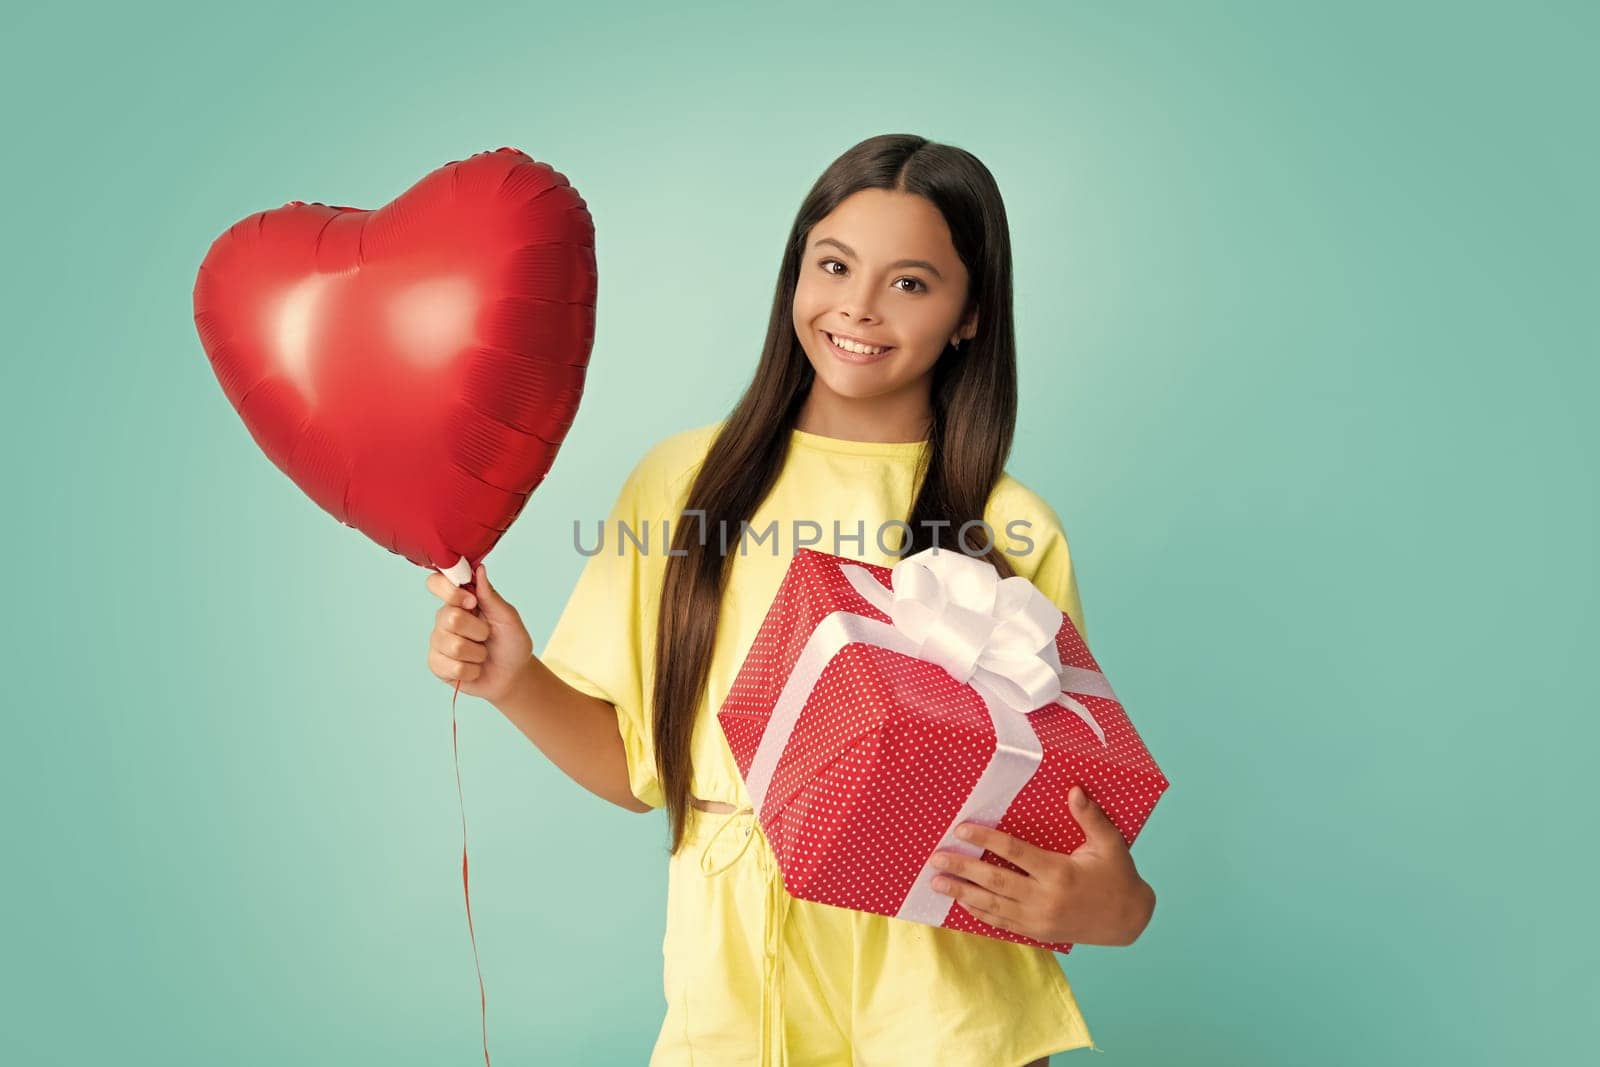 Teenager child holding gift box on blue isolated background. Gift for kids birthday. Christmas or New Year present box. Happy girl face, positive and smiling emotions. Love valentines, heart balloon